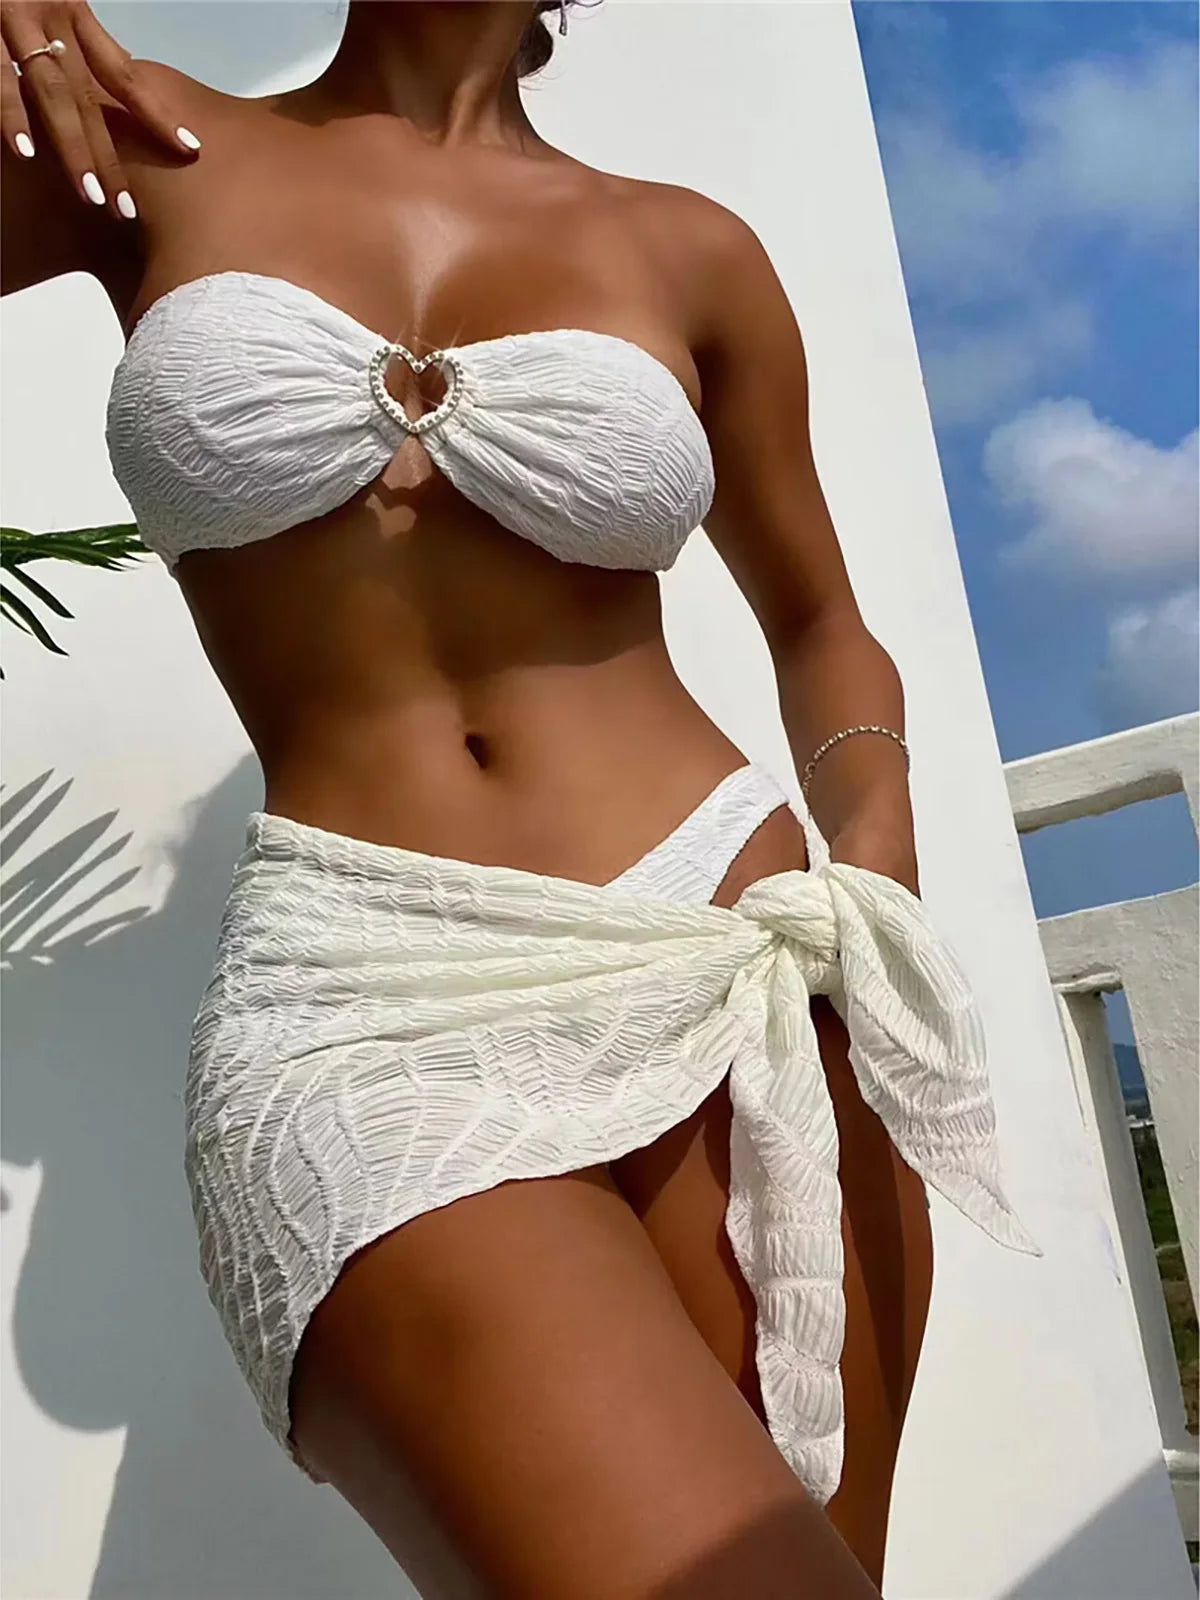 3PCS Wrinkled Bandeau Bikini Set with Sarong in Beige and Black, Made of Nylon and Spandex, Wire Free and Low Waist, Fits True to Size for Women aged 18-35 and Adults, Available in Stock with Free Shipping